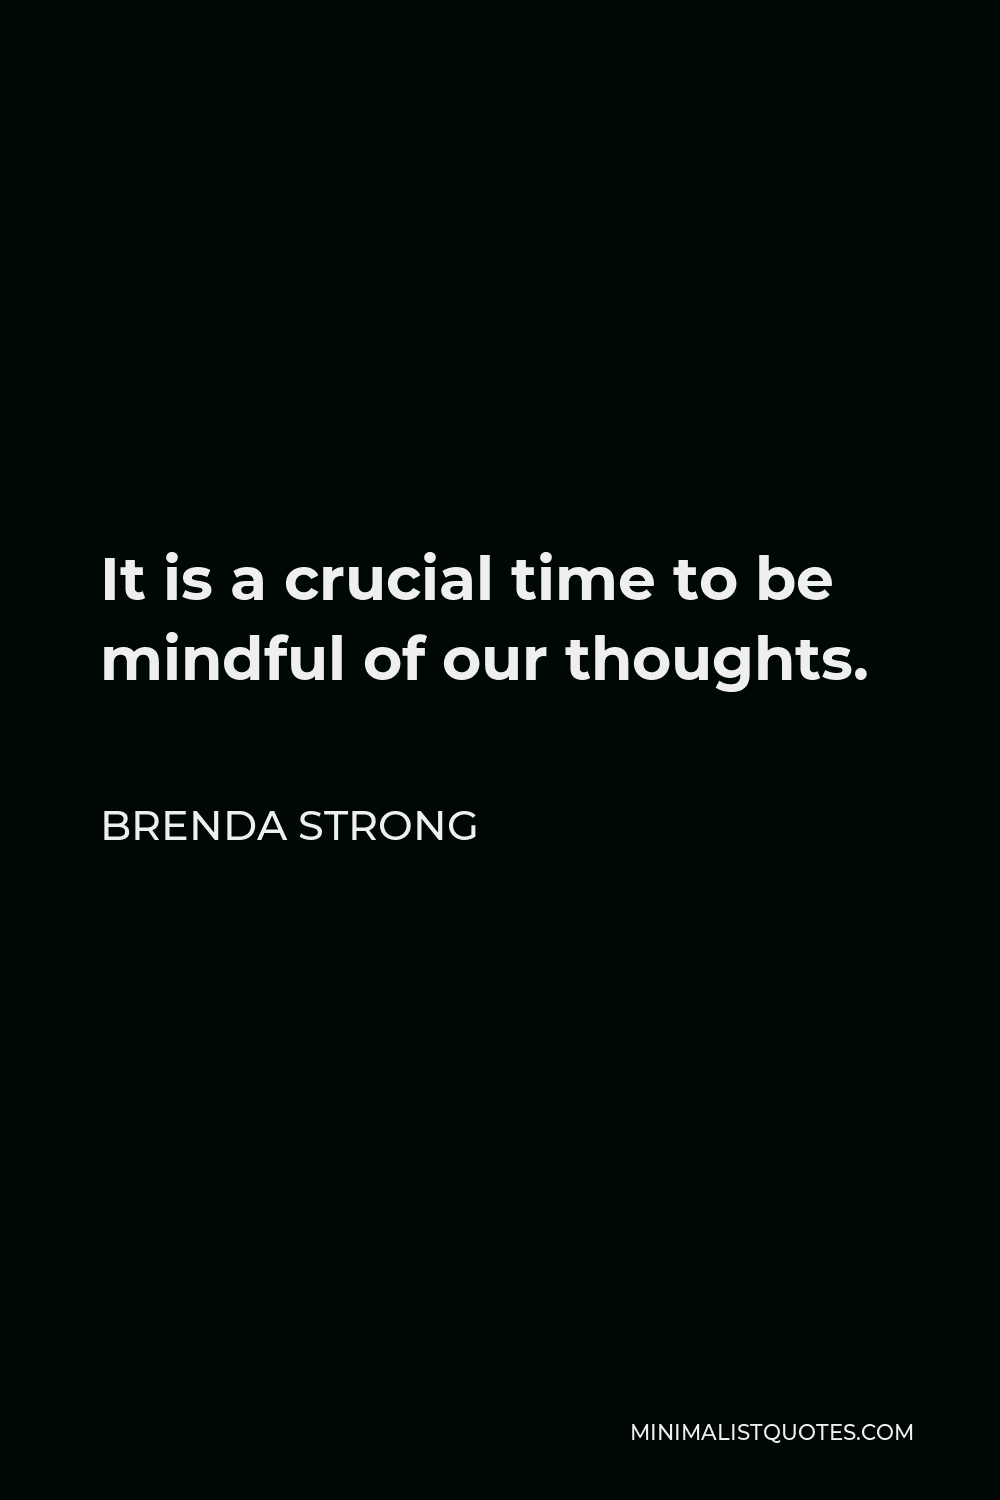 Brenda Strong Quote - It is a crucial time to be mindful of our thoughts.